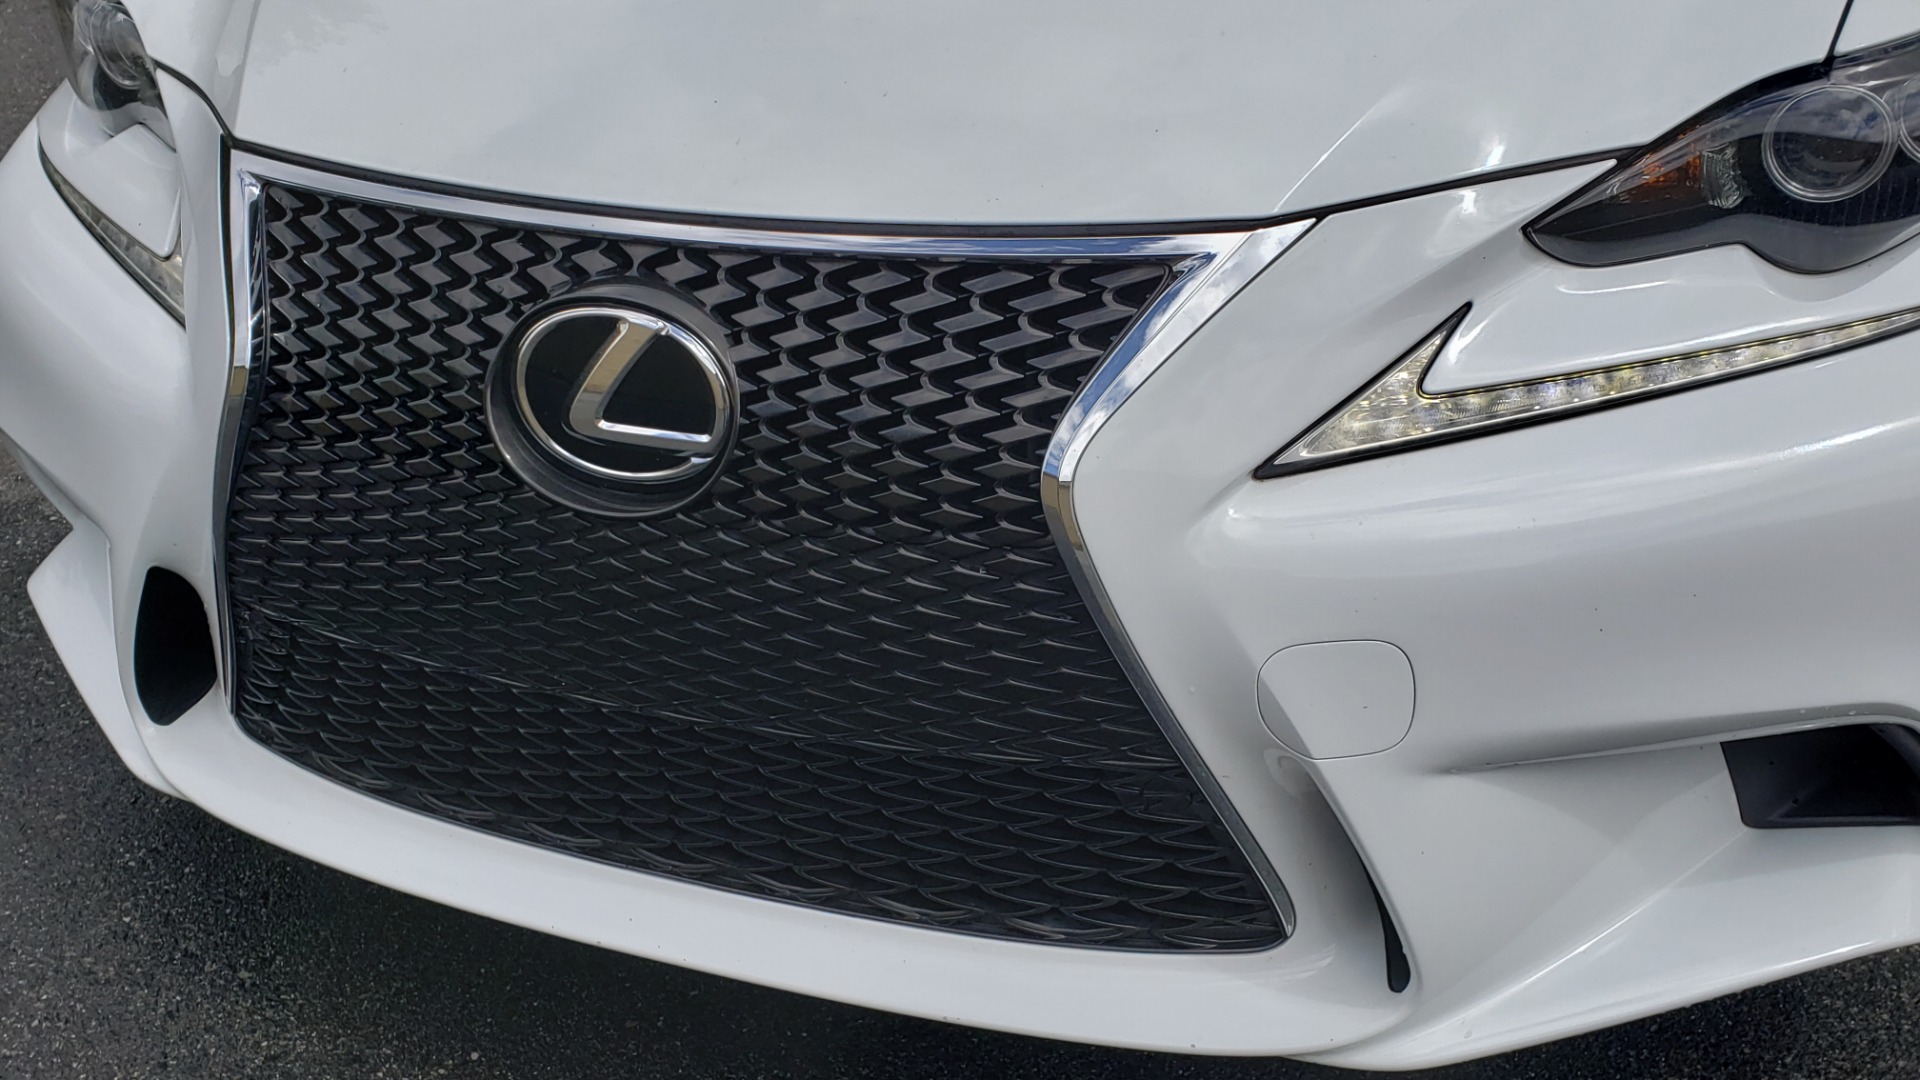 Used 2014 Lexus IS 350 F-SPORT / NAV / SUNROOF / REARVIEW / BSM / MARK LEV SND for sale Sold at Formula Imports in Charlotte NC 28227 21